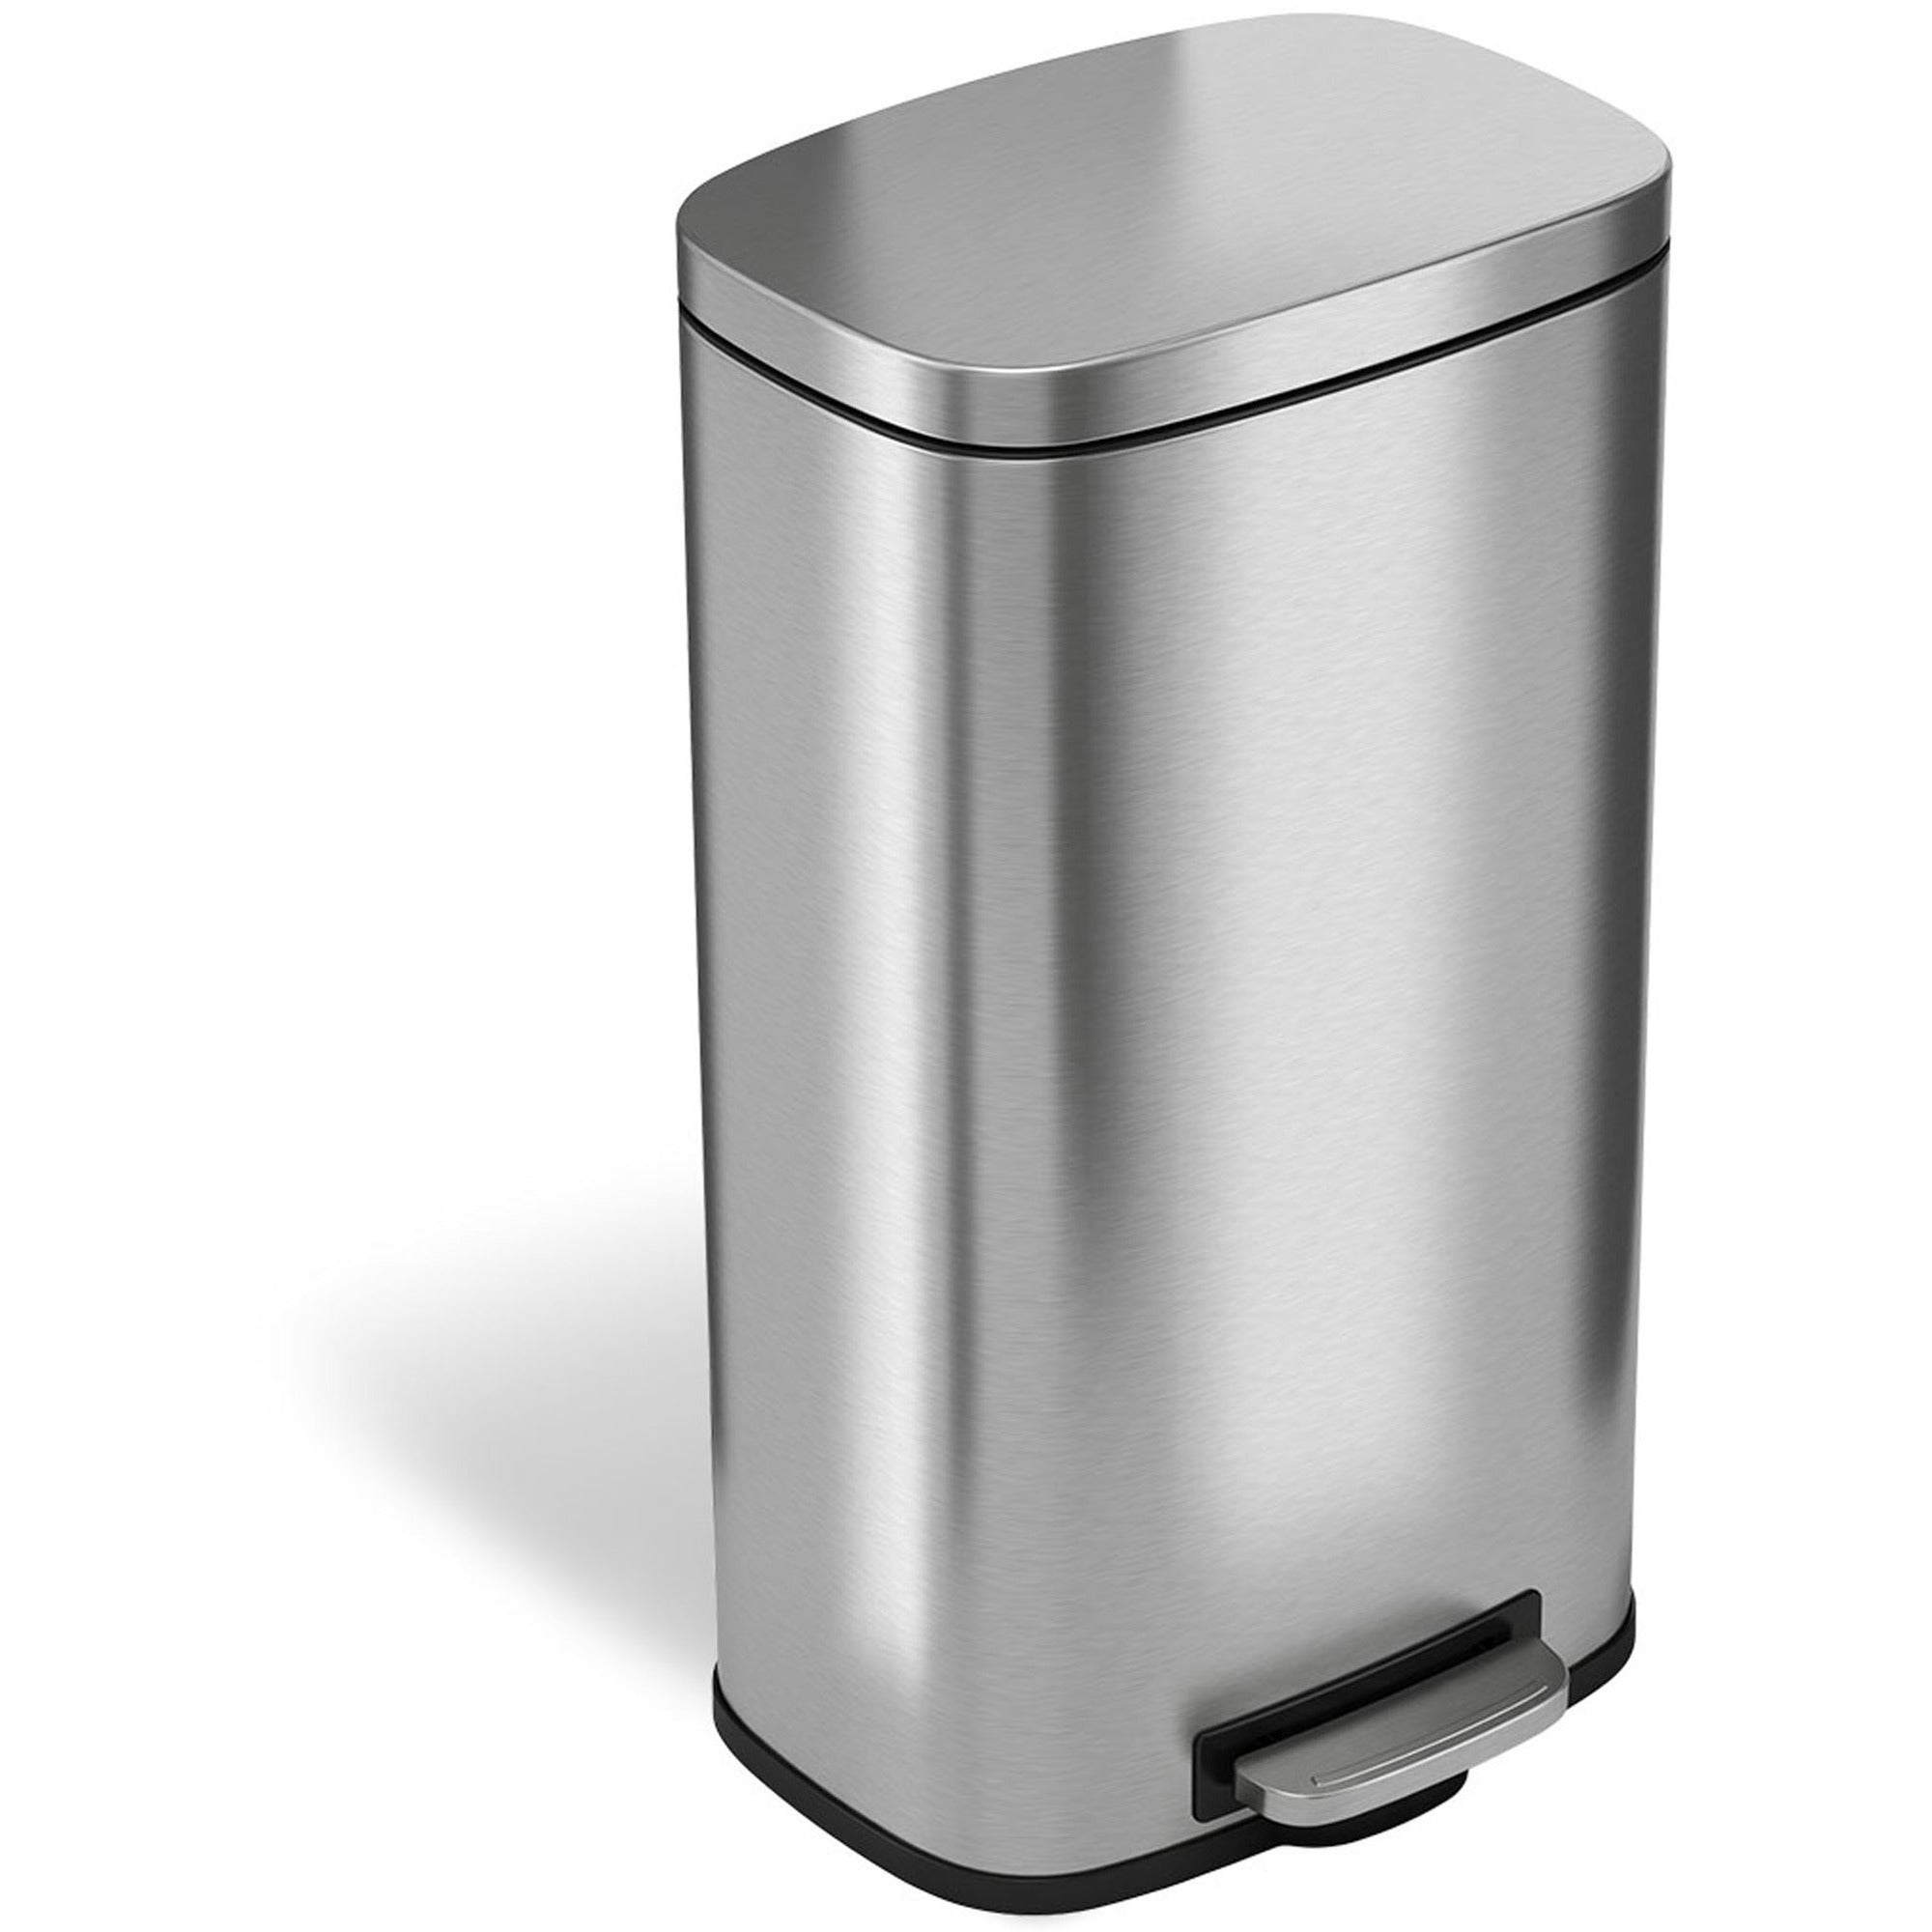 hls-commercial-stainless-steel-soft-step-trash-can-8-gal-capacity-fire-resistant-smooth-pedal-control-fingerprint-resistant-smudge-resistant-lid-locked-rubber-feet-handle-non-skid-removable-inner-bin-248-height-x-135-width-stain_hlchlss08r - 1